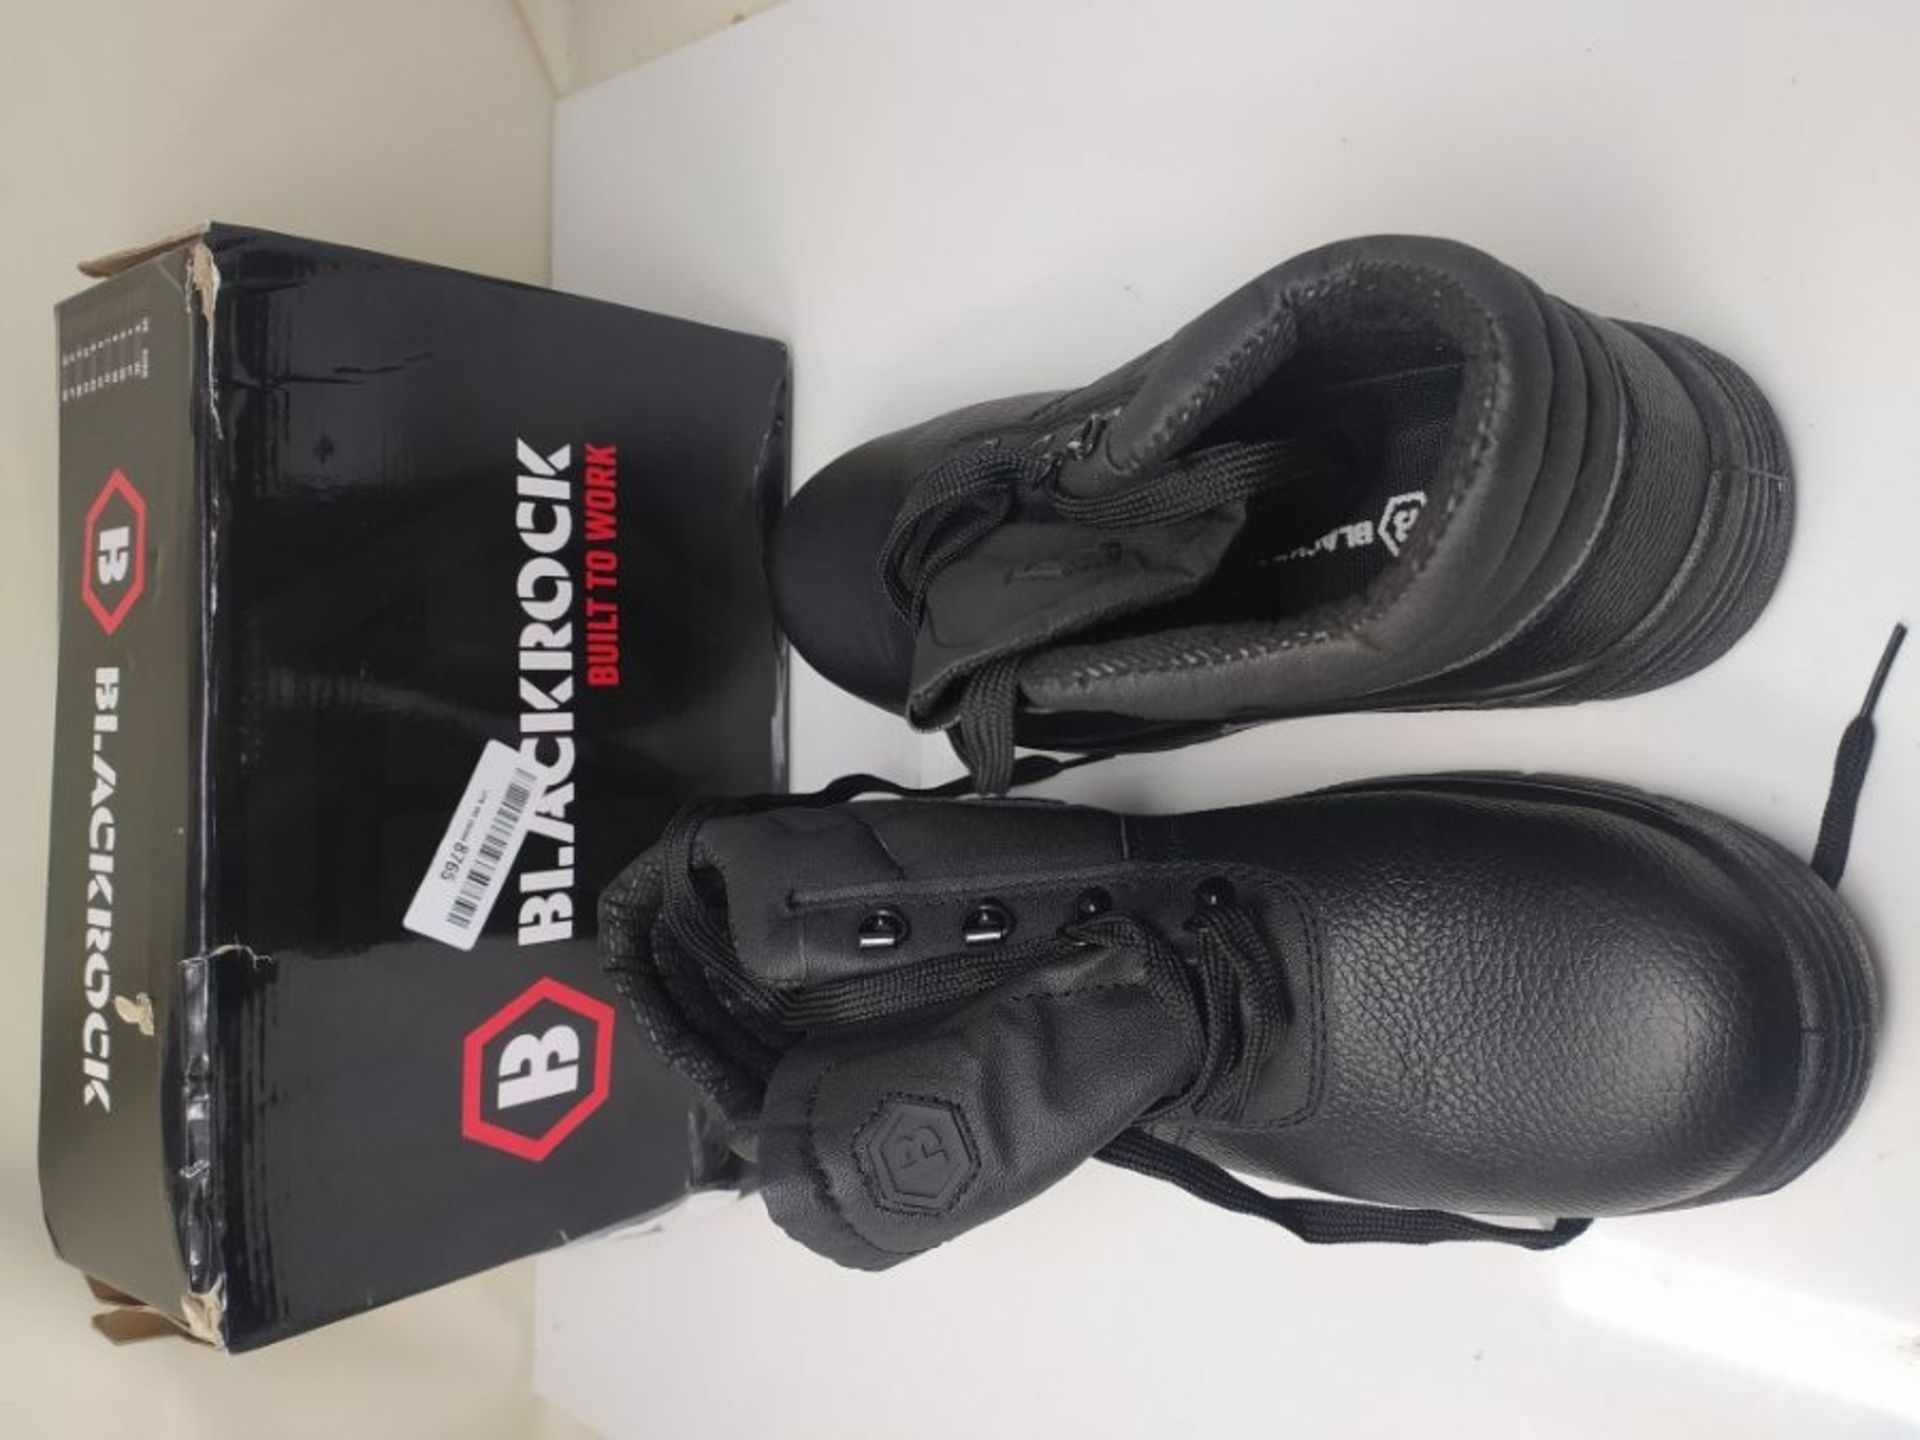 Blackrock Black Leather Work Safety Chukka Boots With Steel Toe Caps And Midsole (UK8 - Image 2 of 2